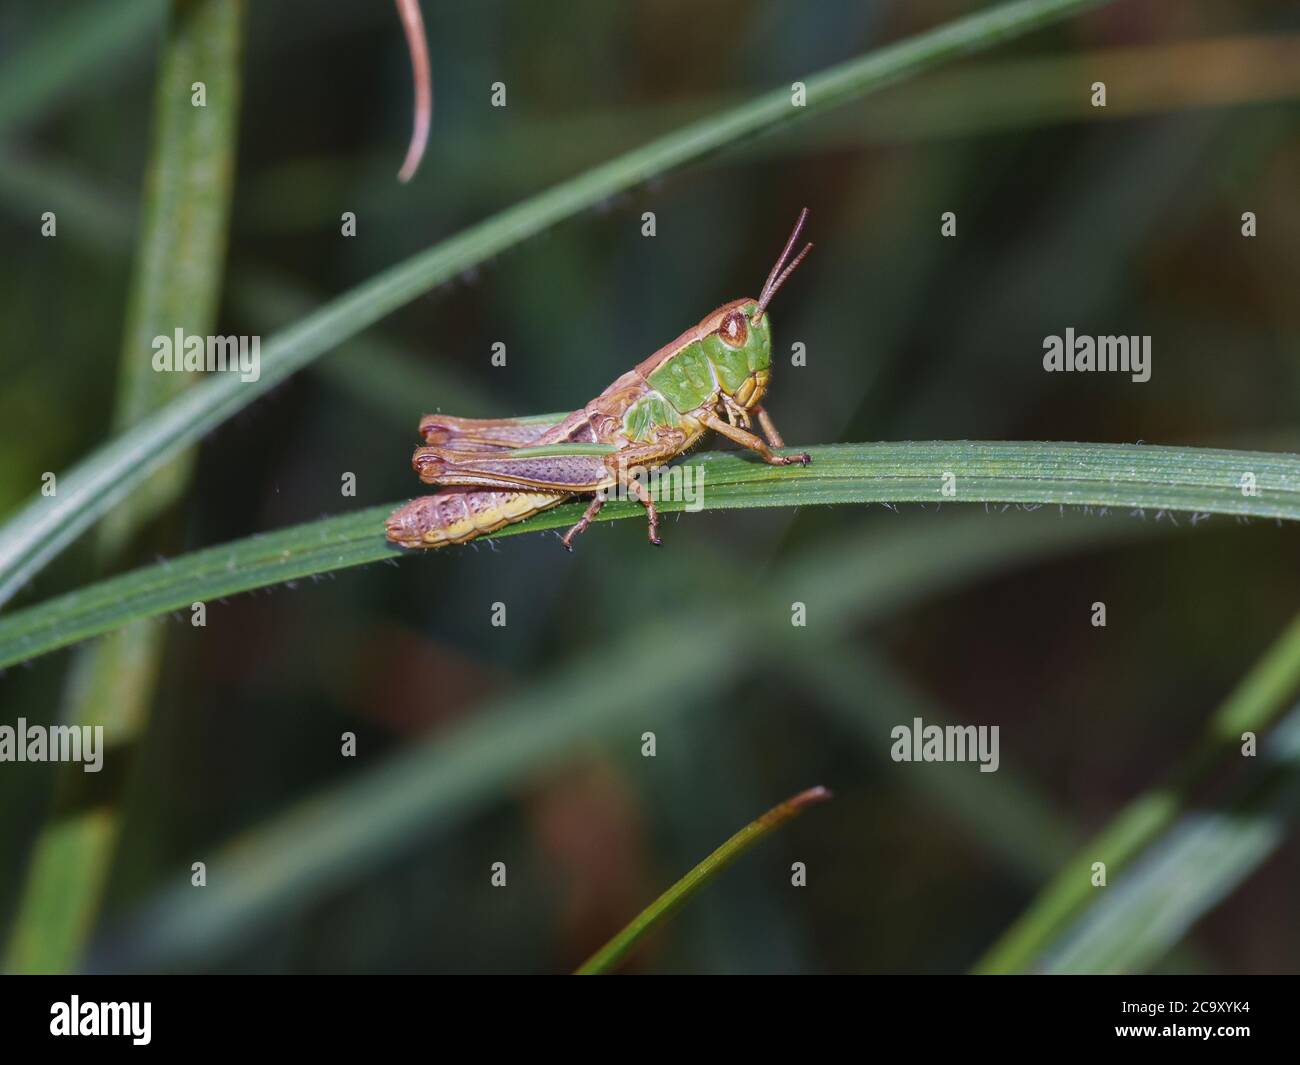 Close-up of common green grasshopper sitting on the blade of grass. Side view of Omocestus viridulus in green and light brown colors. Selective focus, Stock Photo